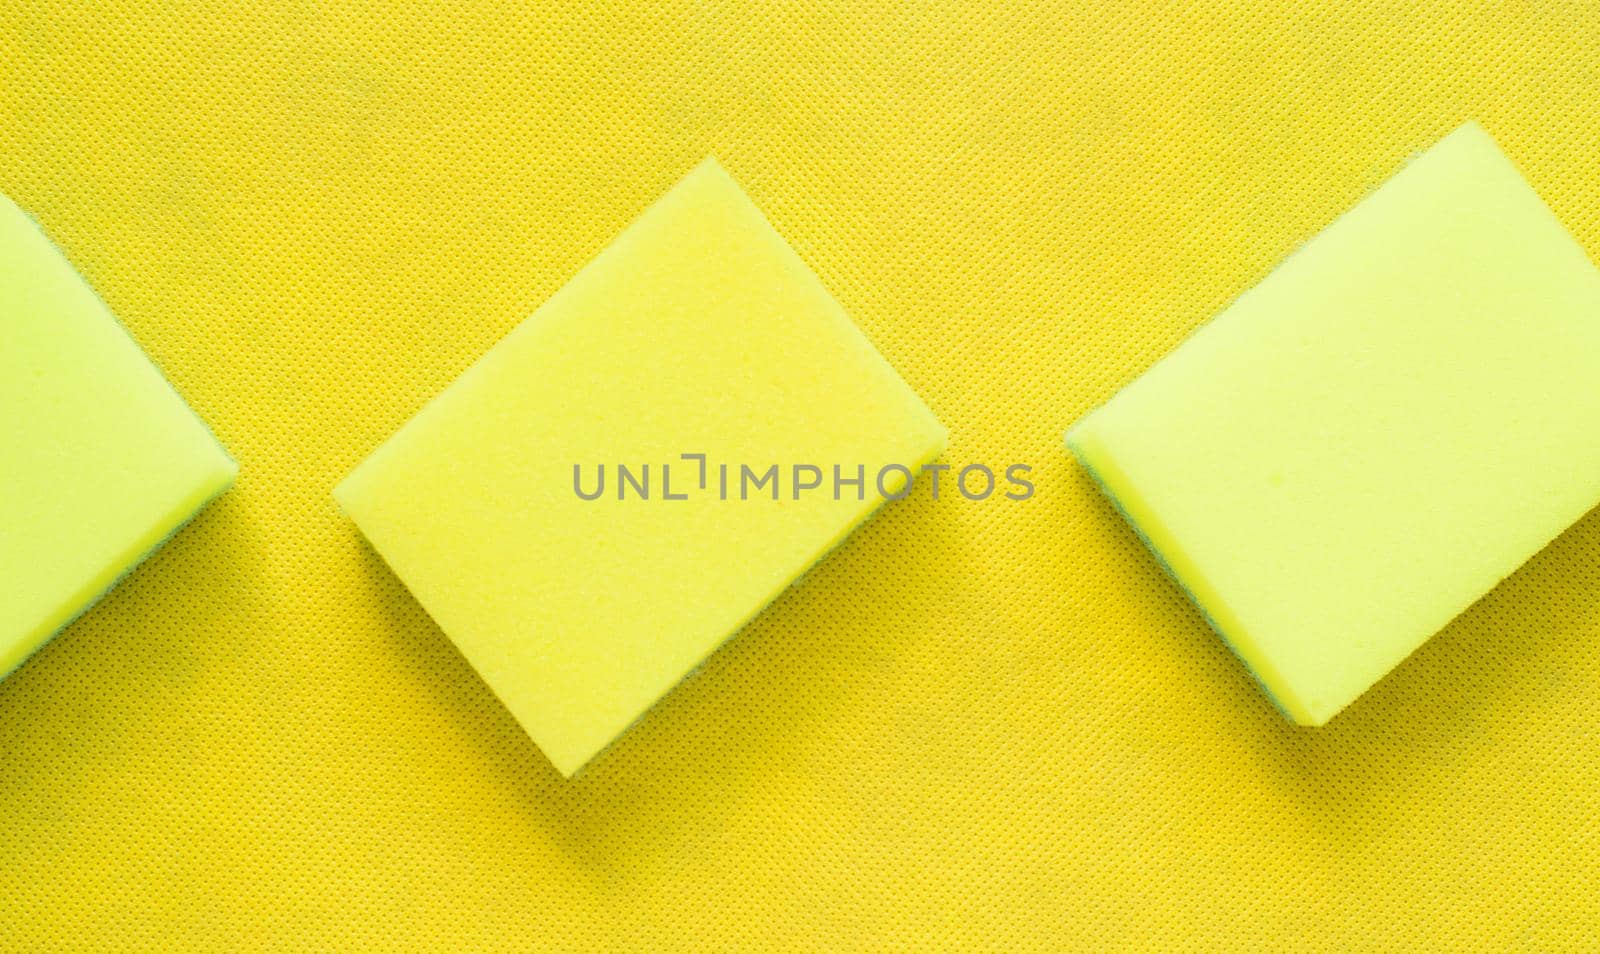 several bright yellow dishwashing sponges on a yellow background.